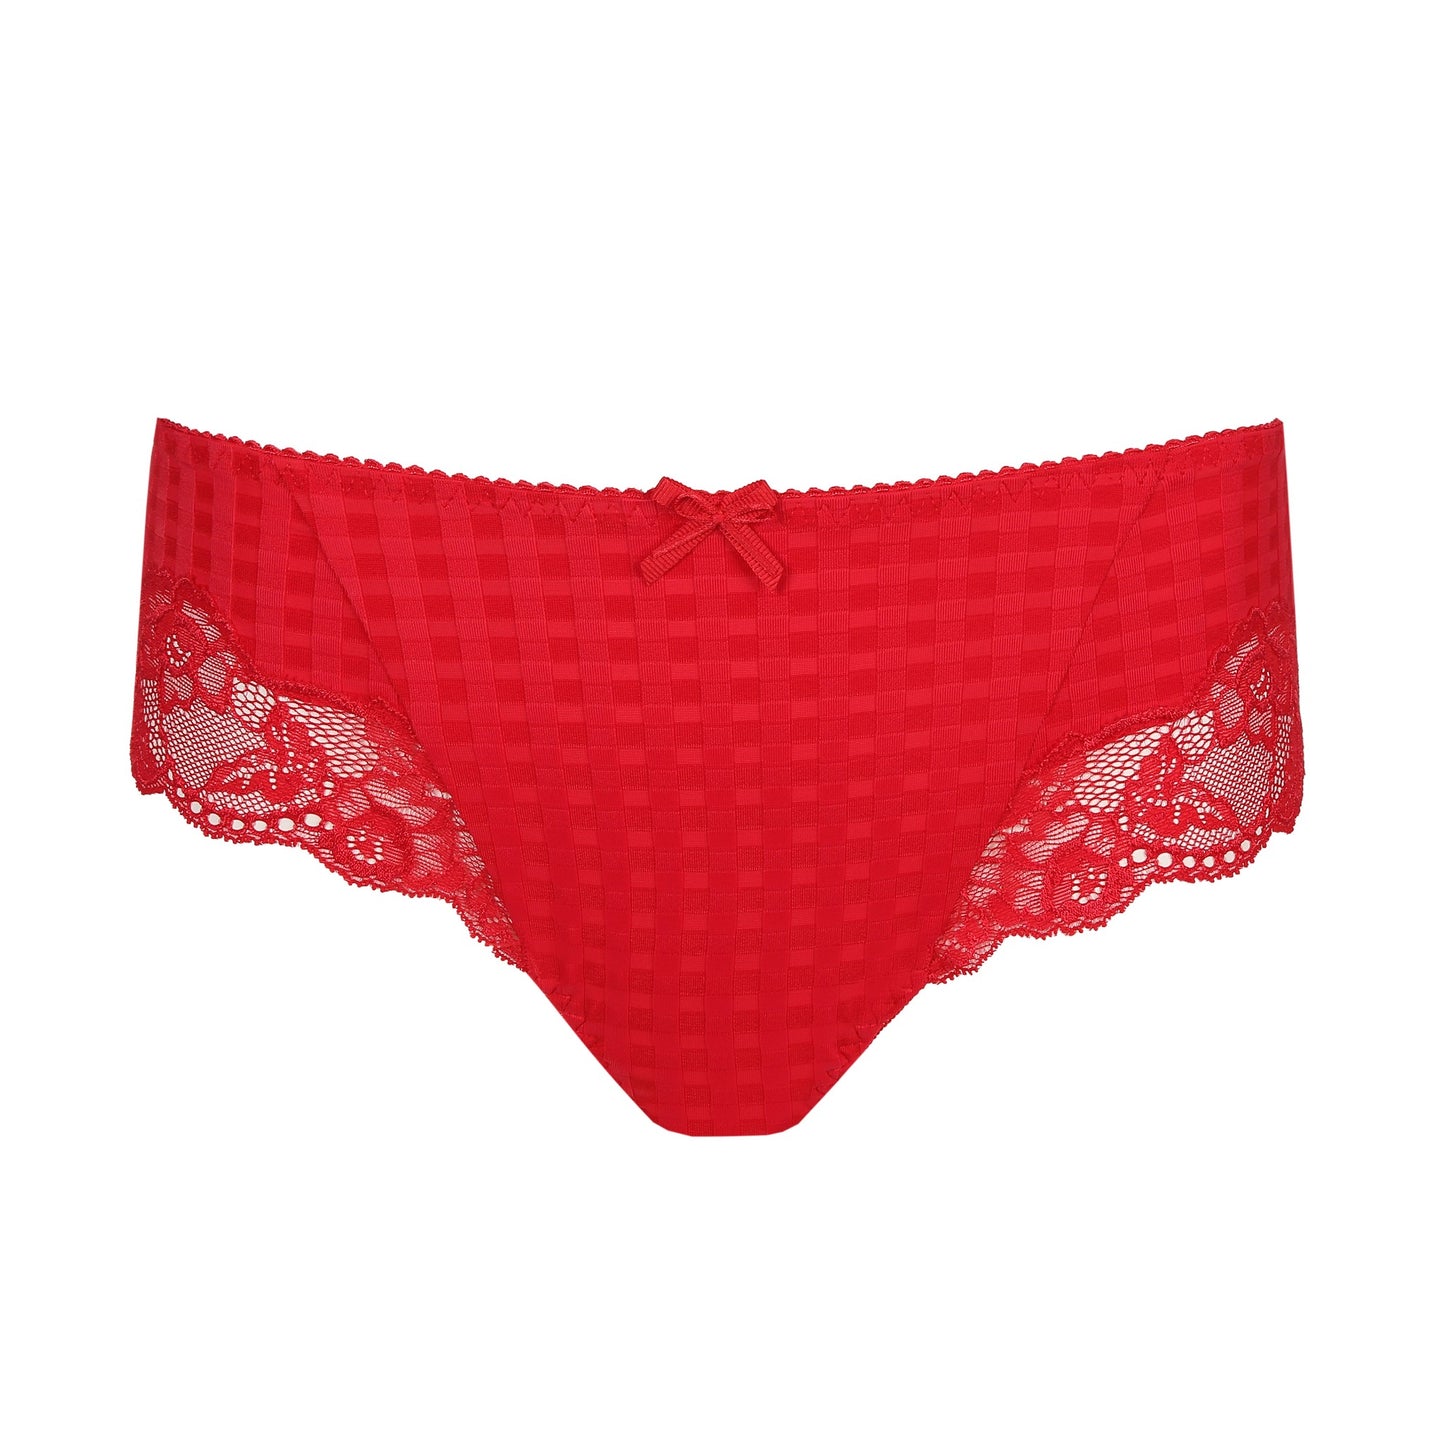 Front view of the Madison cheeky cut panty with lace inserts in Scarlet by Primadonna.